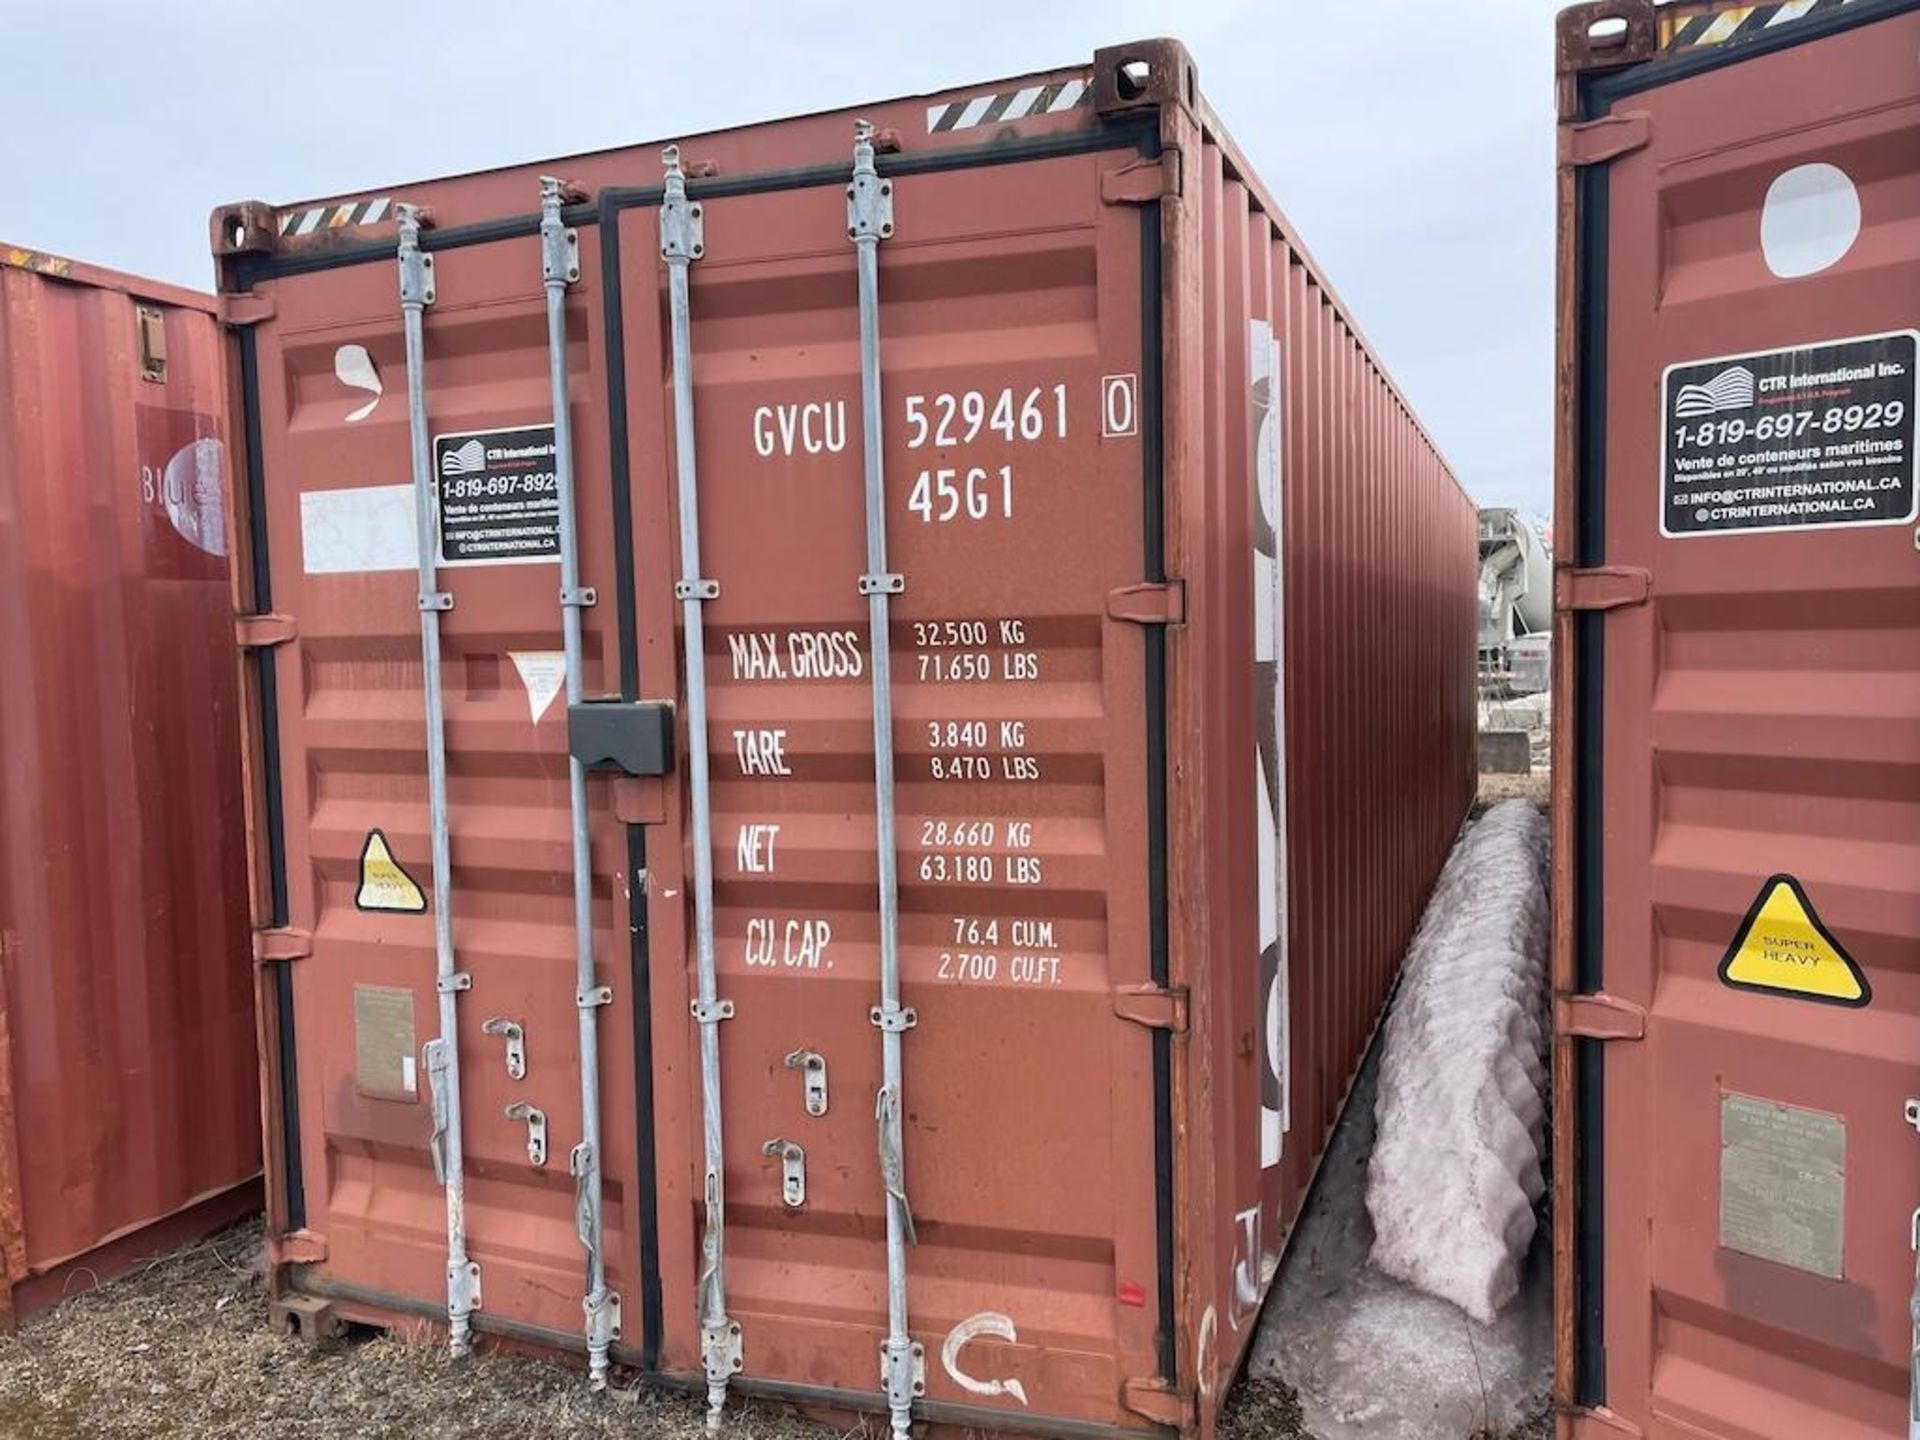 40 FT SEA CONTAINER, EXCLUDING CONTENTS, DELAYED PICK UP UNTIL MAY 13 [9] [TROIS RIVIERES] *PLEASE N - Image 2 of 4